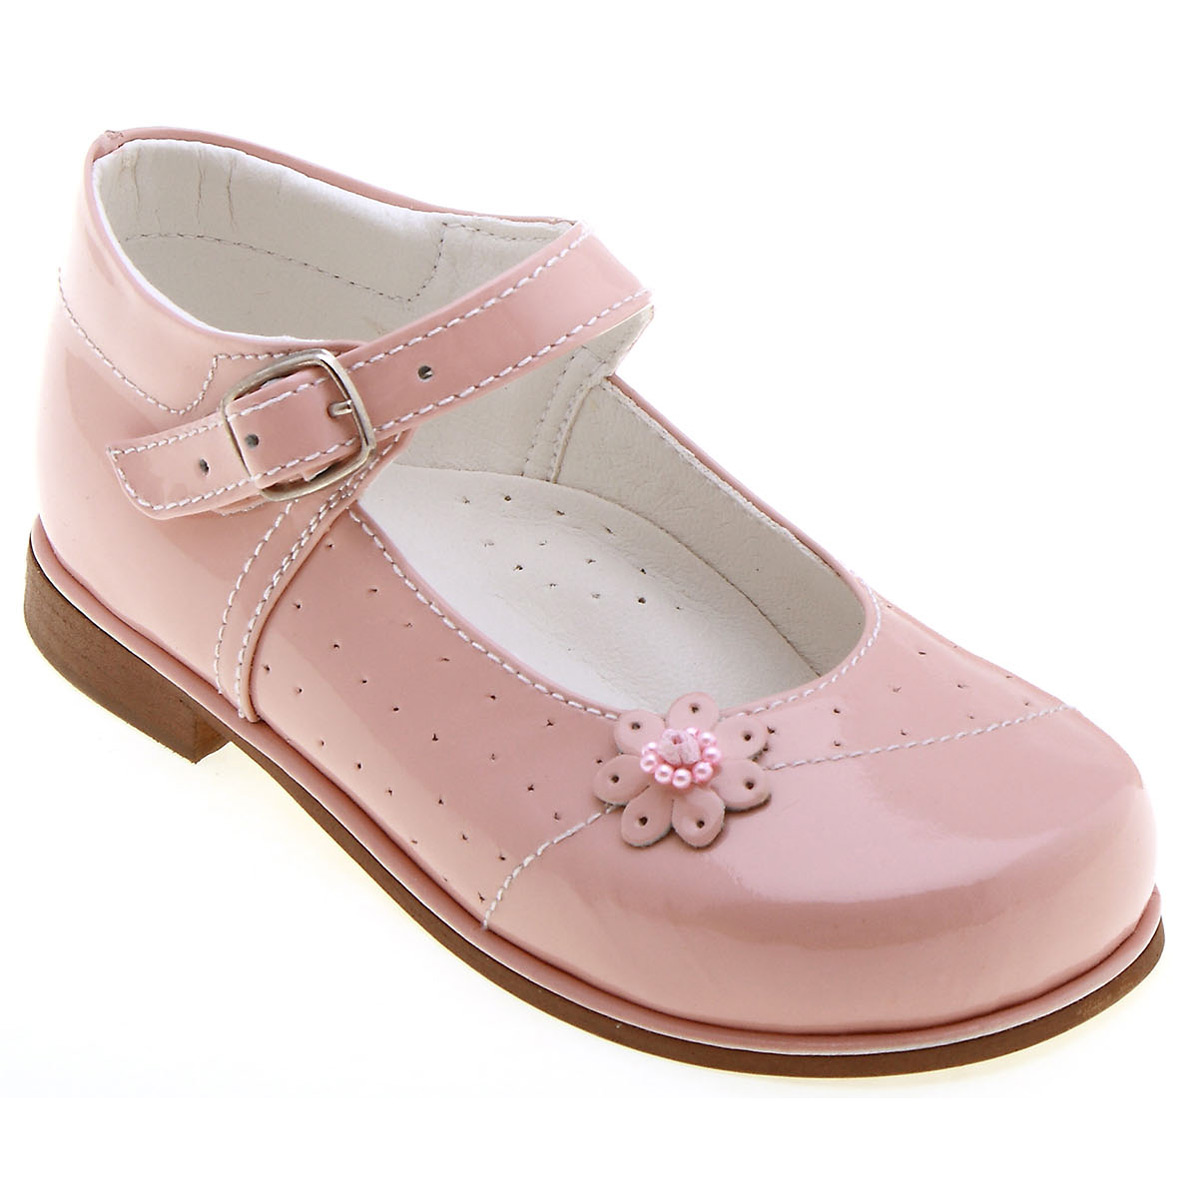 Girls classic Mary Janes Pink Patent Shoes Leather Flowers